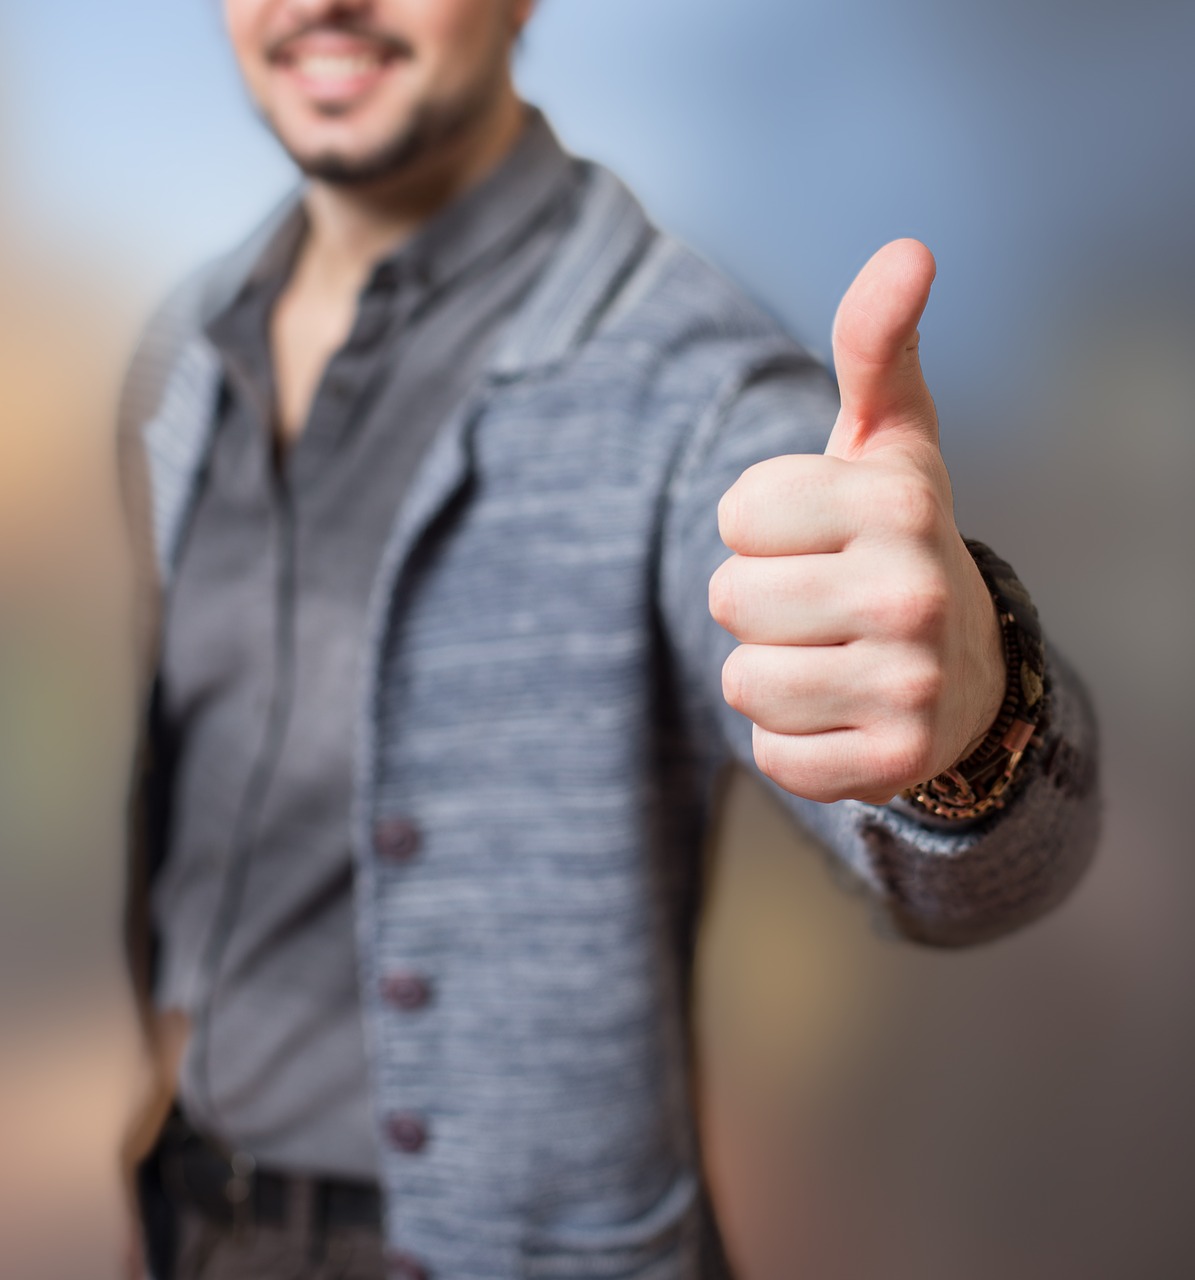 thumbs up, success, approval.